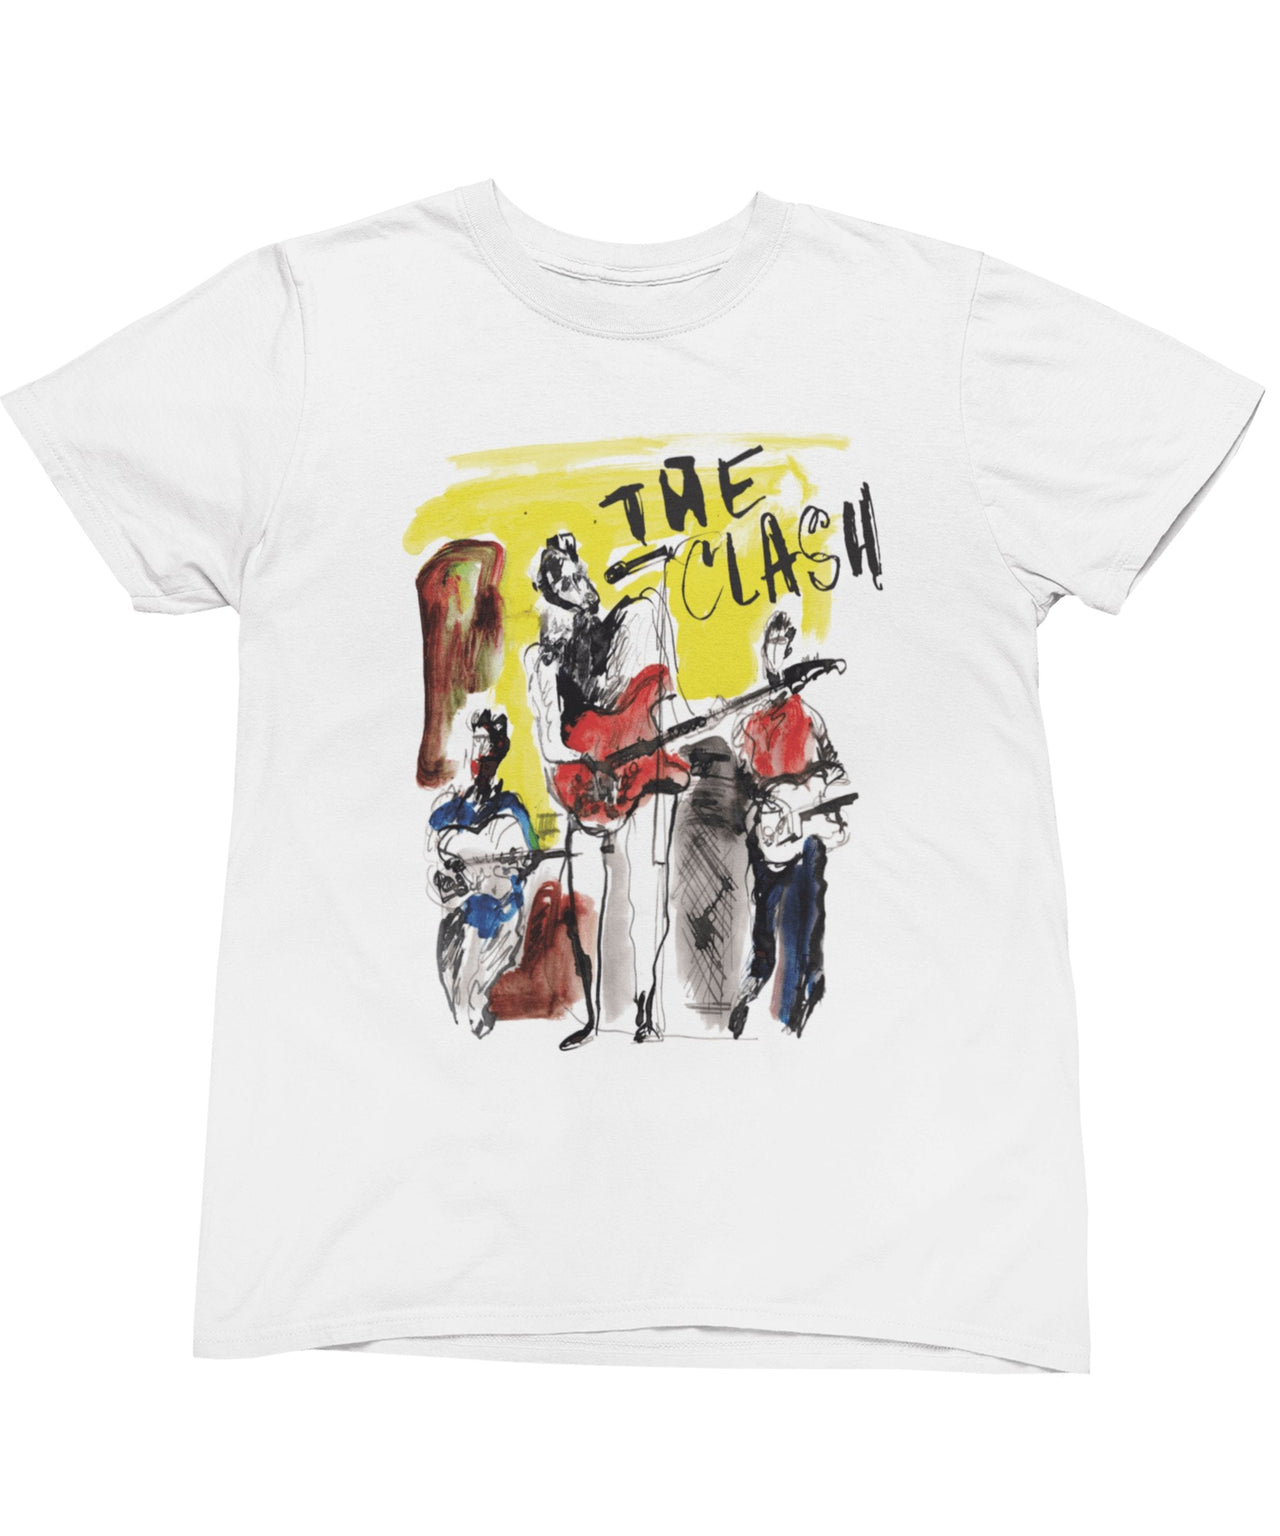 The Clash Band On Stage 1 Mens Graphic T-Shirt 8Ball